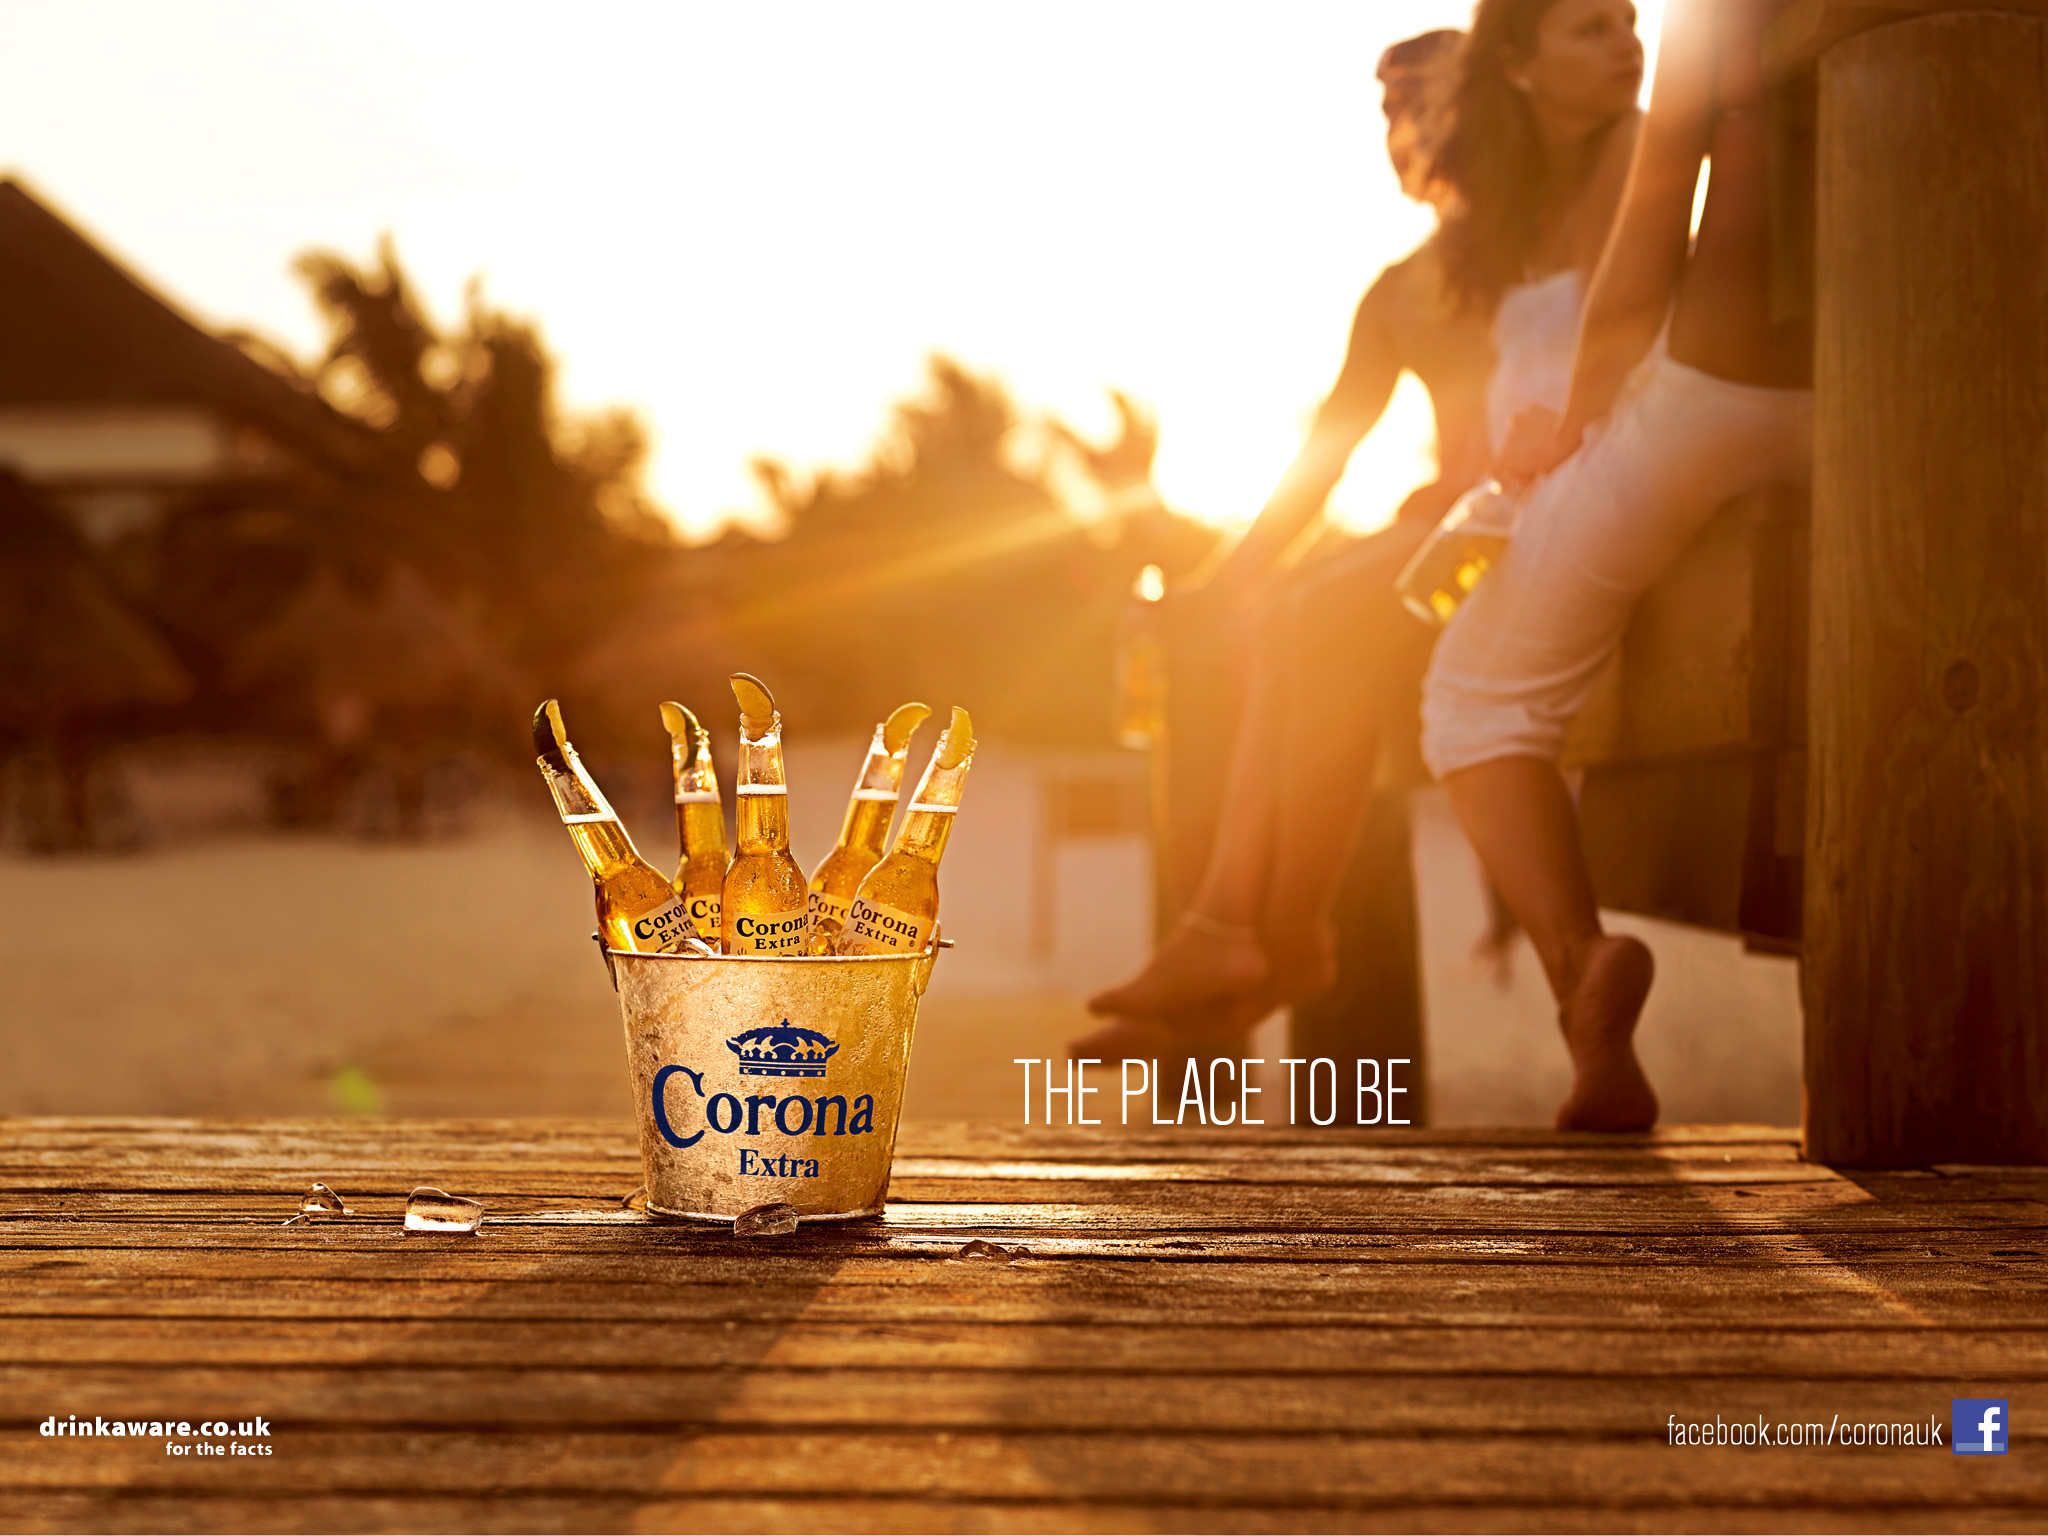 Corona Extra Wallpapers Images Photos Pictures Backgrounds